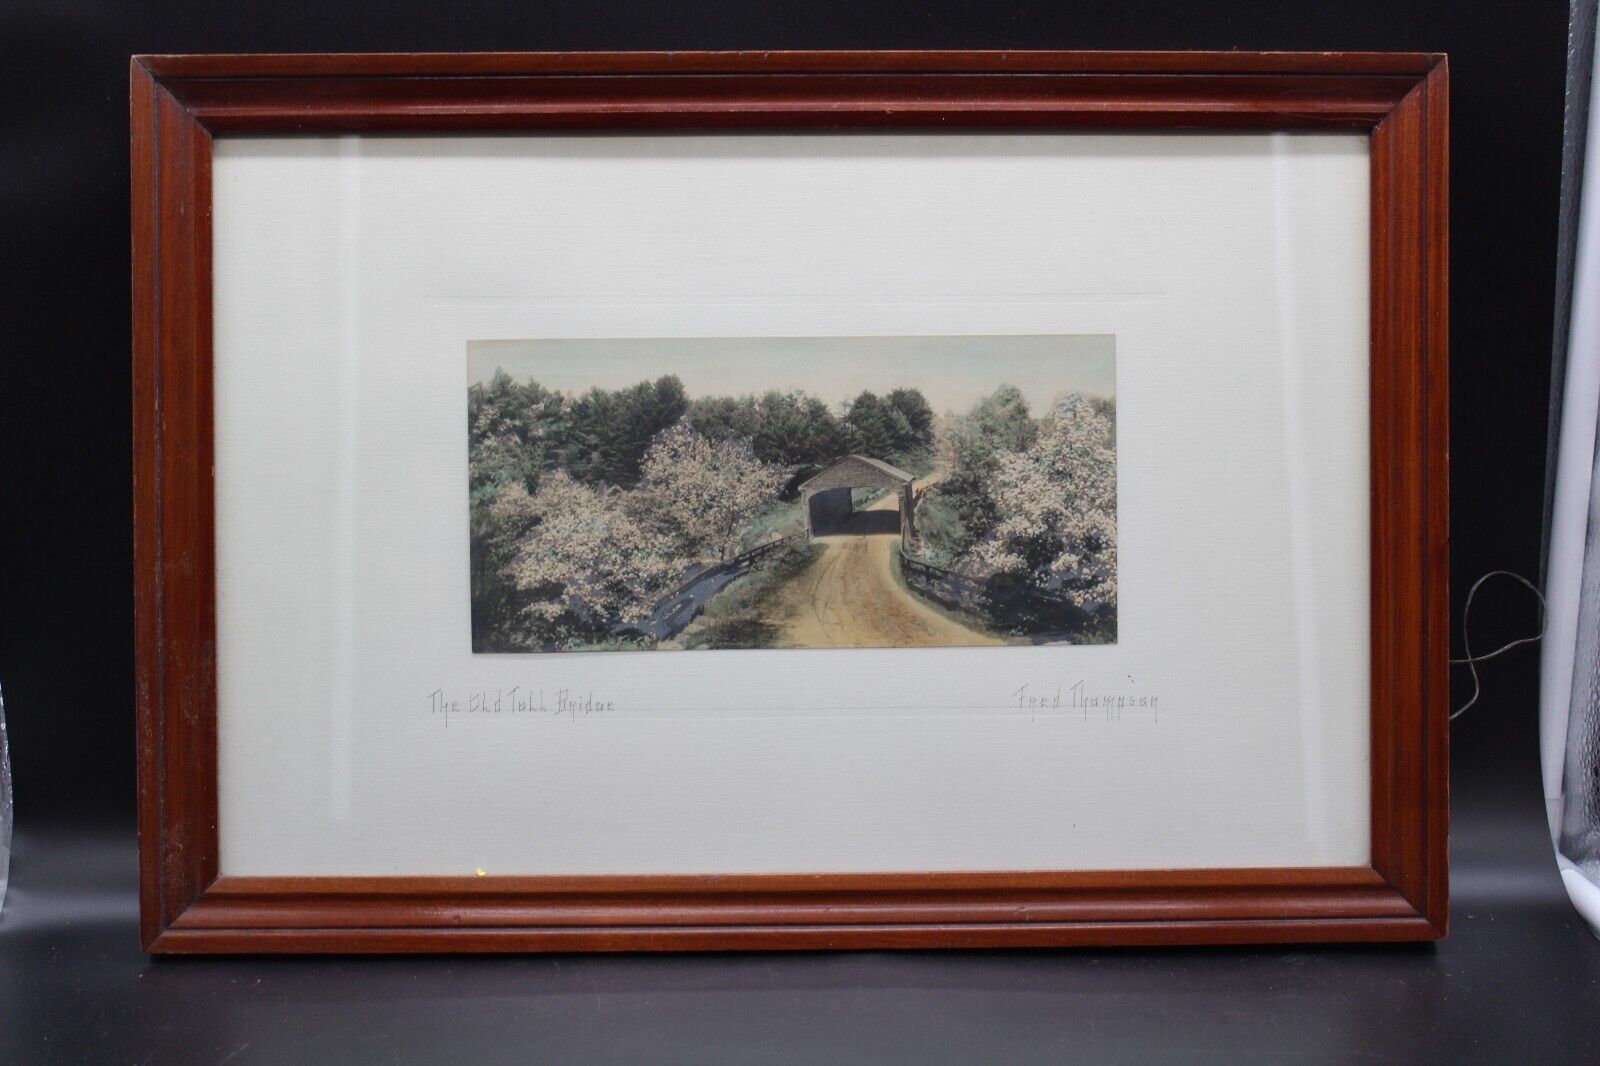 FRED THOMPSON HAND COLORED PHOTO THE OLD TOLL BRIDGE WALLACE NUTTING ART